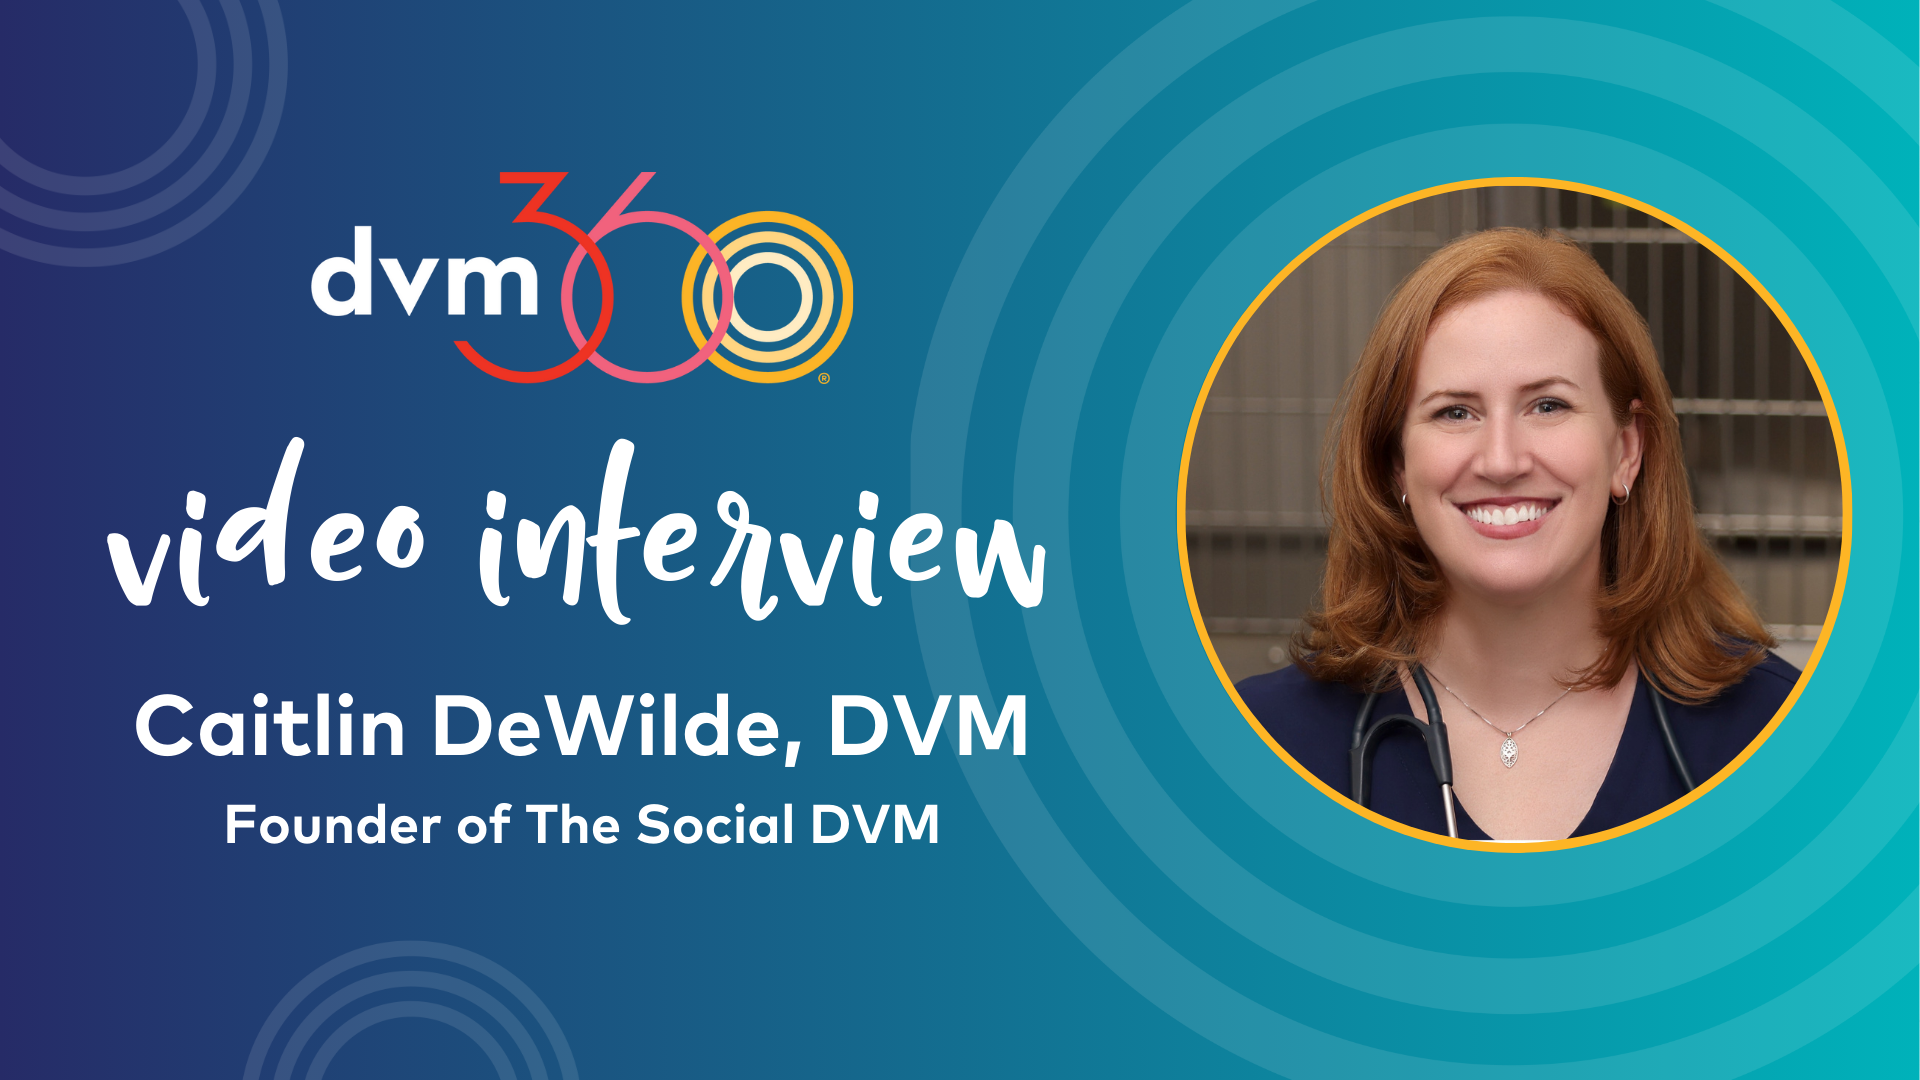 The founder of The Social DVM is coming to Fetch Charlotte